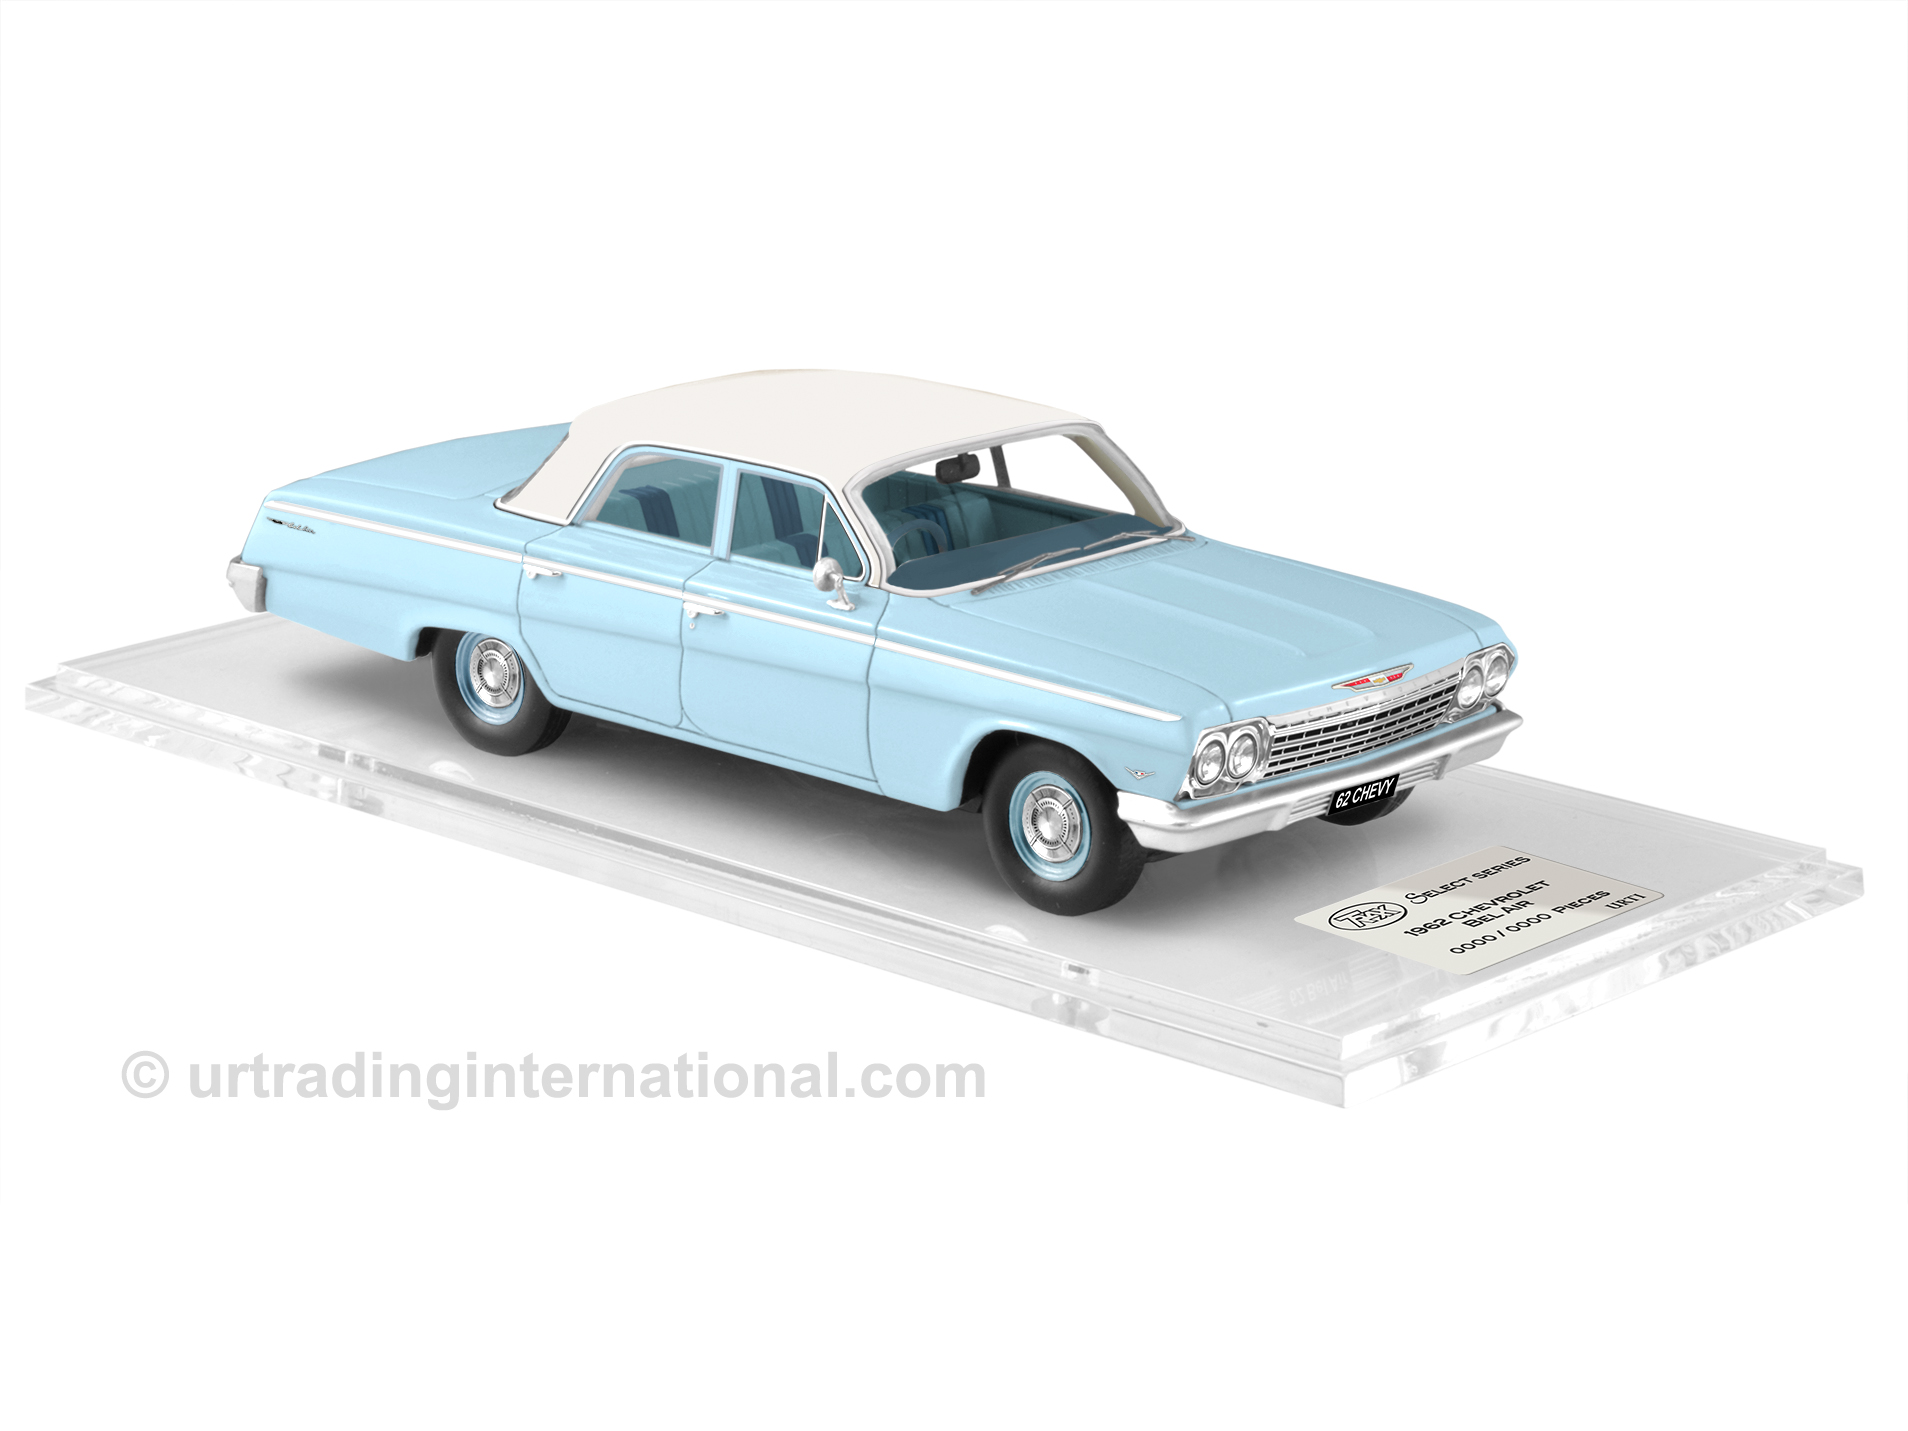 1962 Chevrolet Bel Air – Wedgewood Blue SOLD OUT